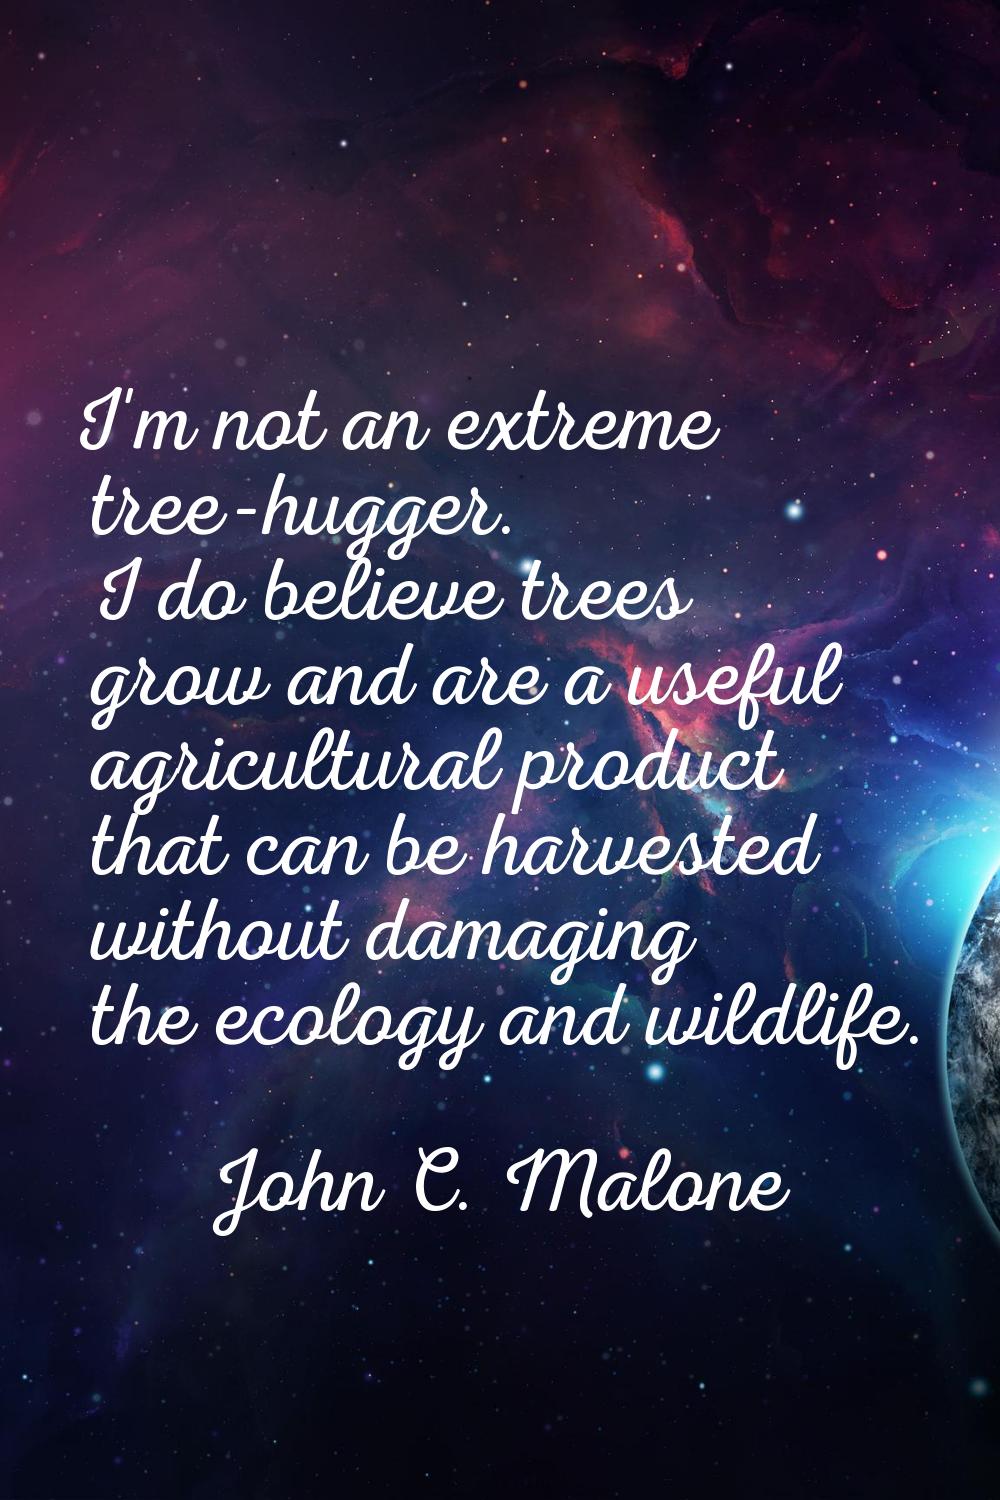 I'm not an extreme tree-hugger. I do believe trees grow and are a useful agricultural product that 